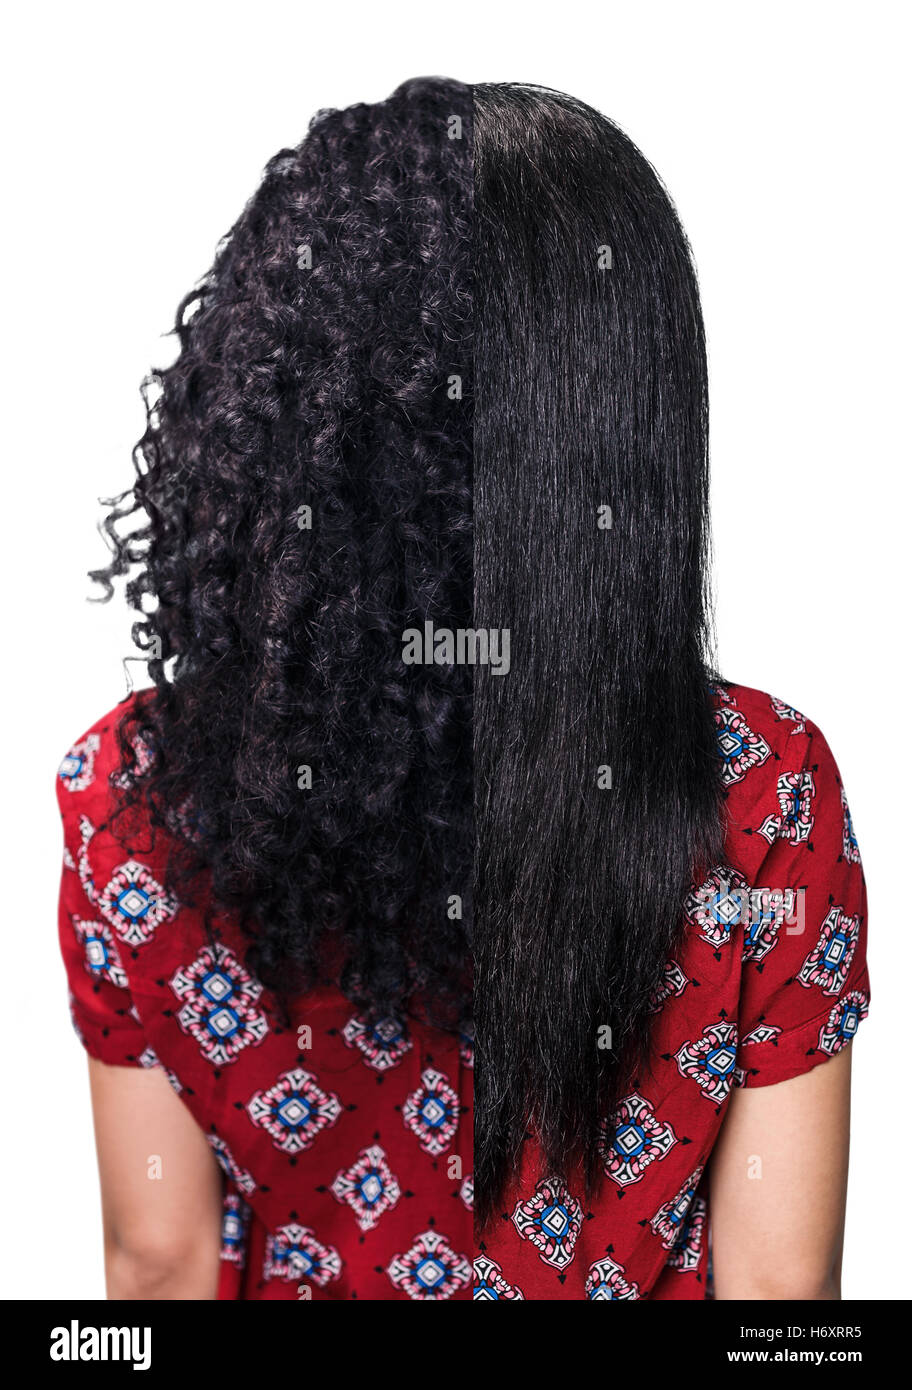 Hair before and after straightening Stock Photo - Alamy